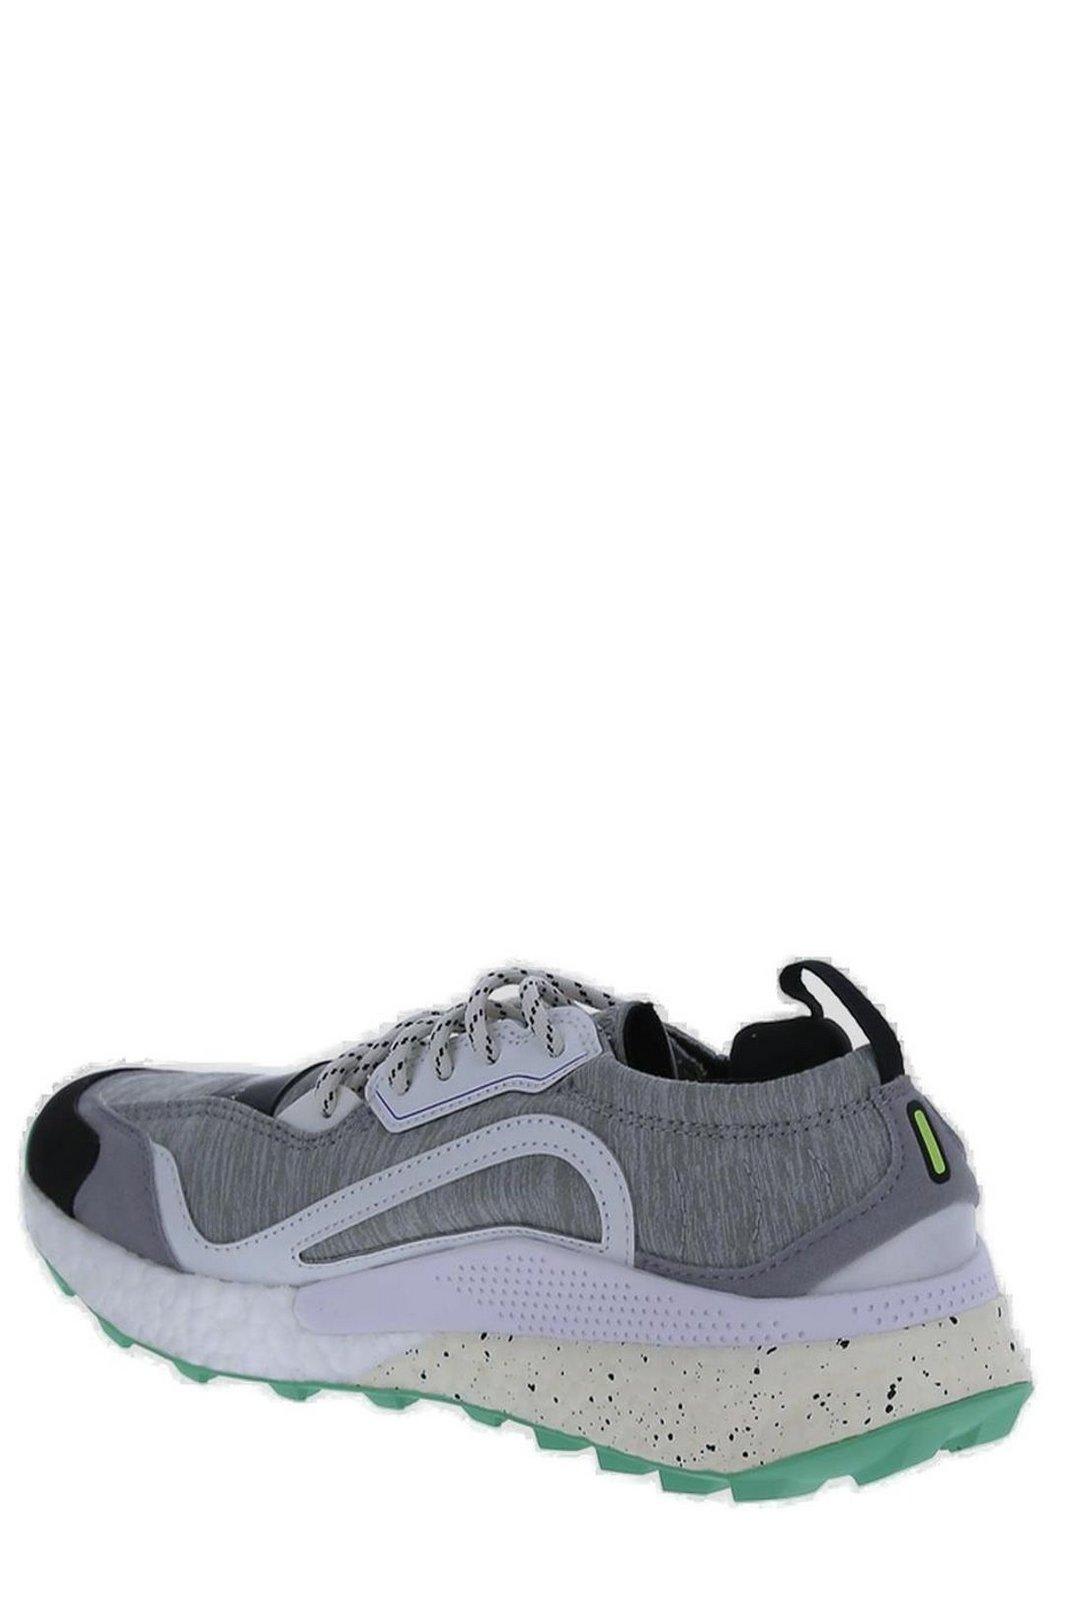 Shop Adidas By Stella Mccartney Outdoor Boost 2.0 Sneakers In Grey